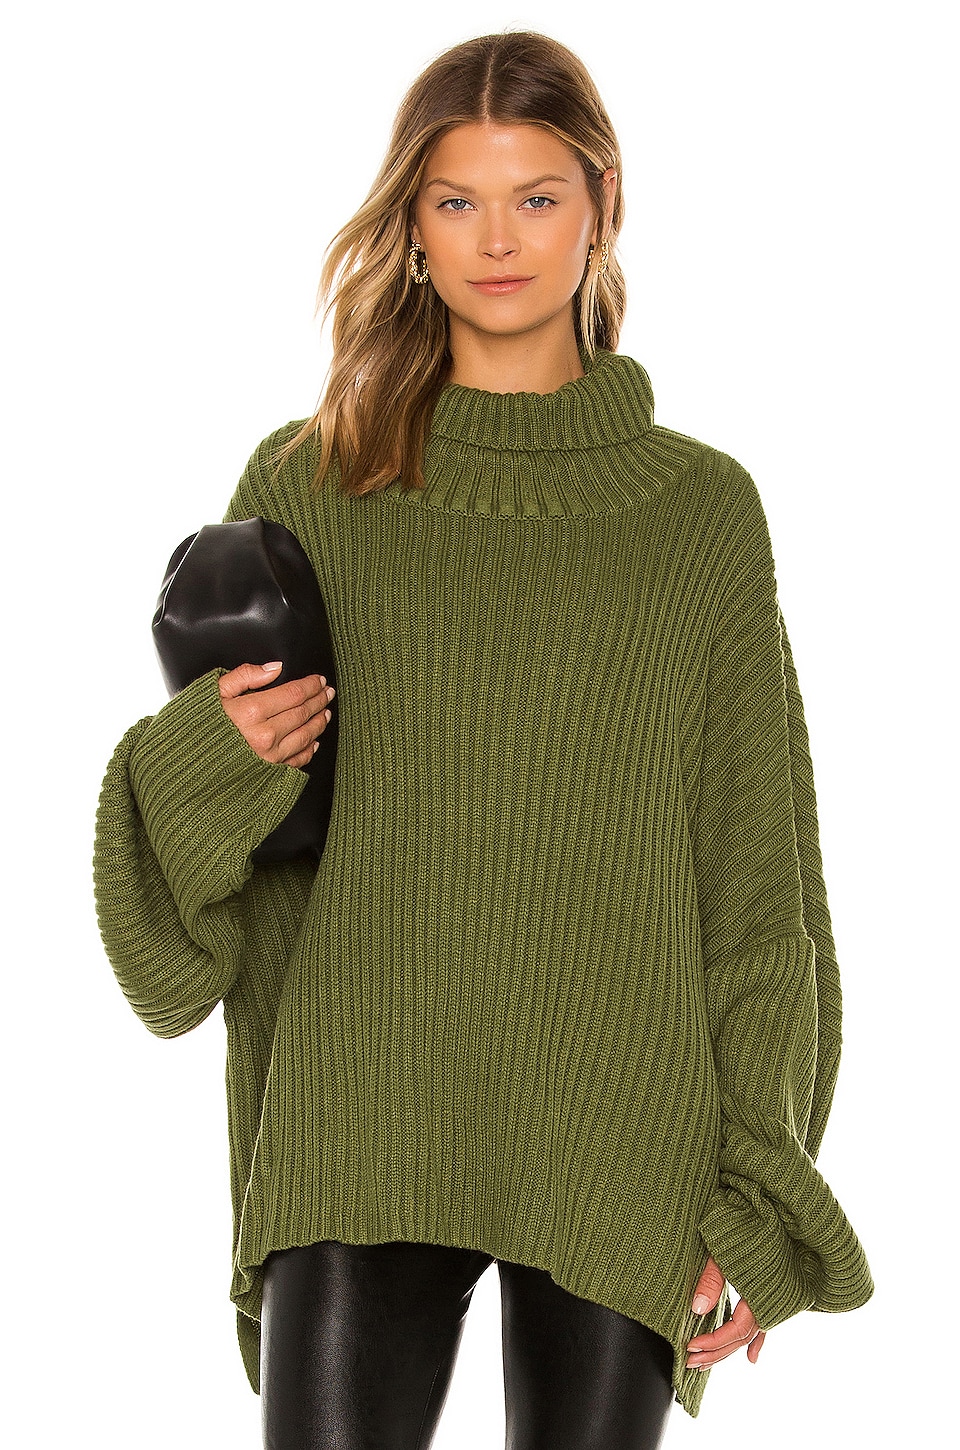 LBLC The Label Casey Sweater in Army | REVOLVE